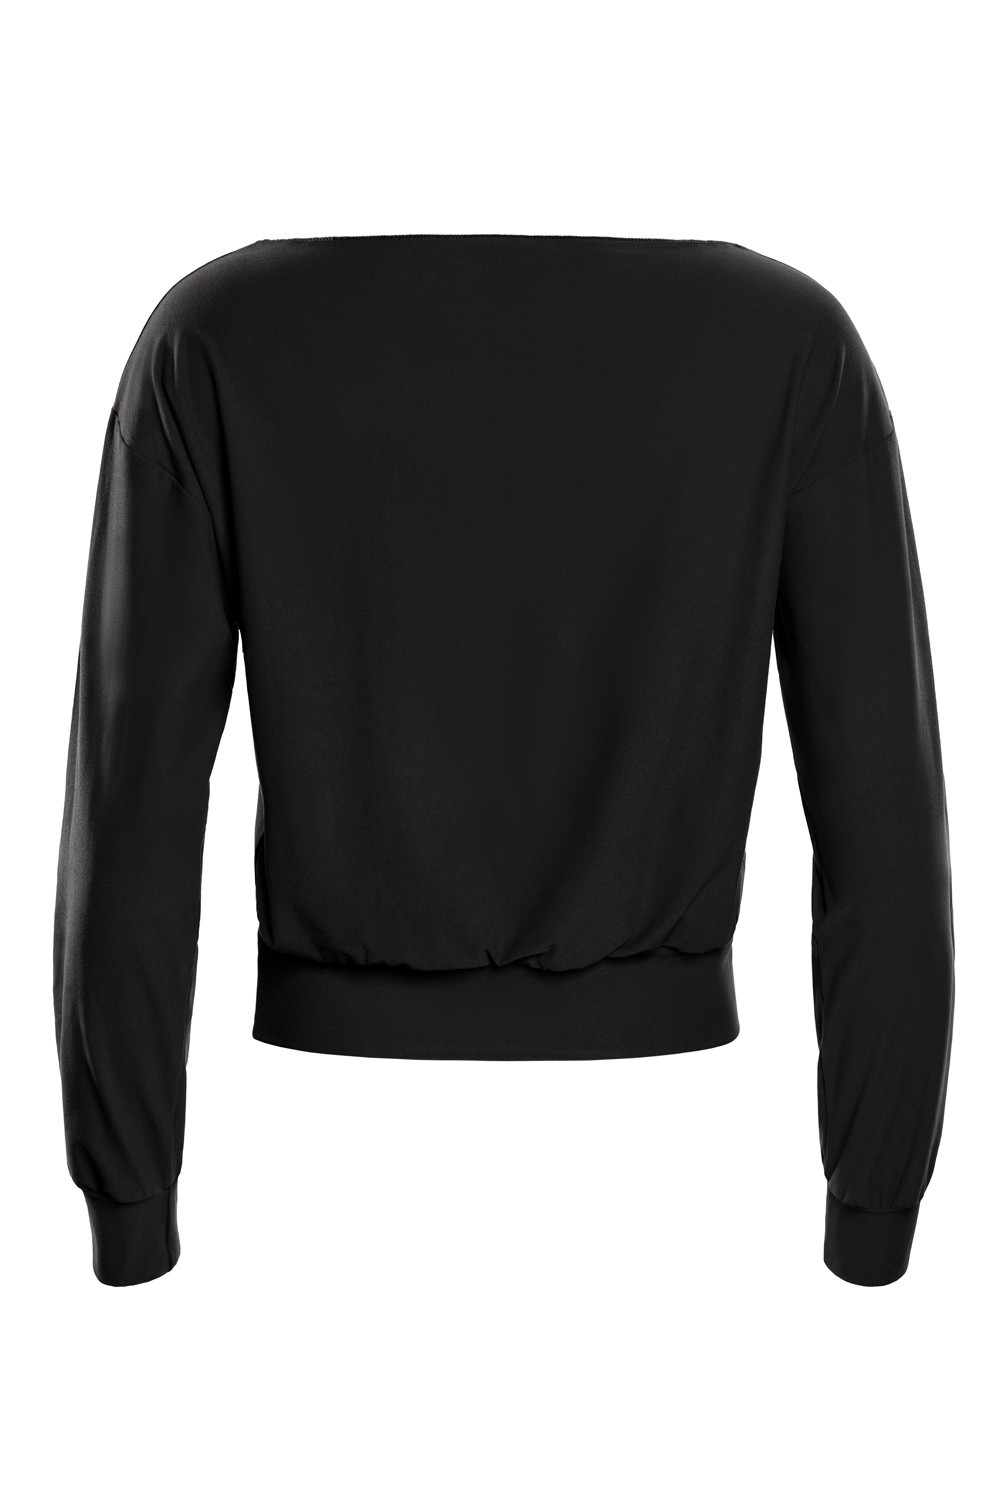 Style Functional Winshape schwarz, Sleeve Top Street Long Cropped Soft LS003LS, Light and